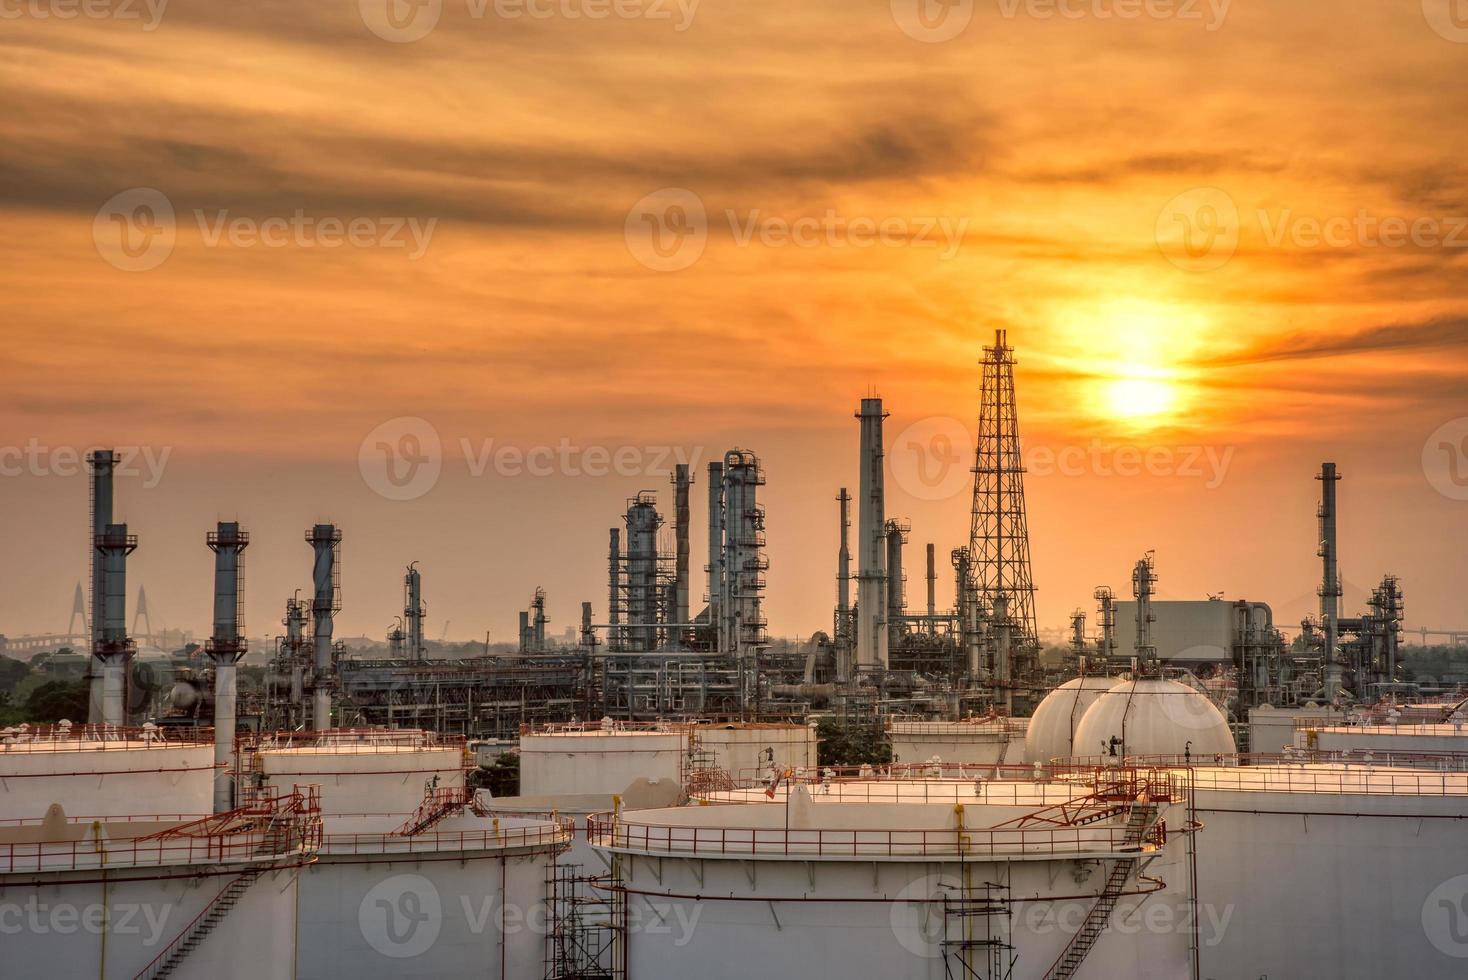 Petrochemical plant Oil and gas industry photo